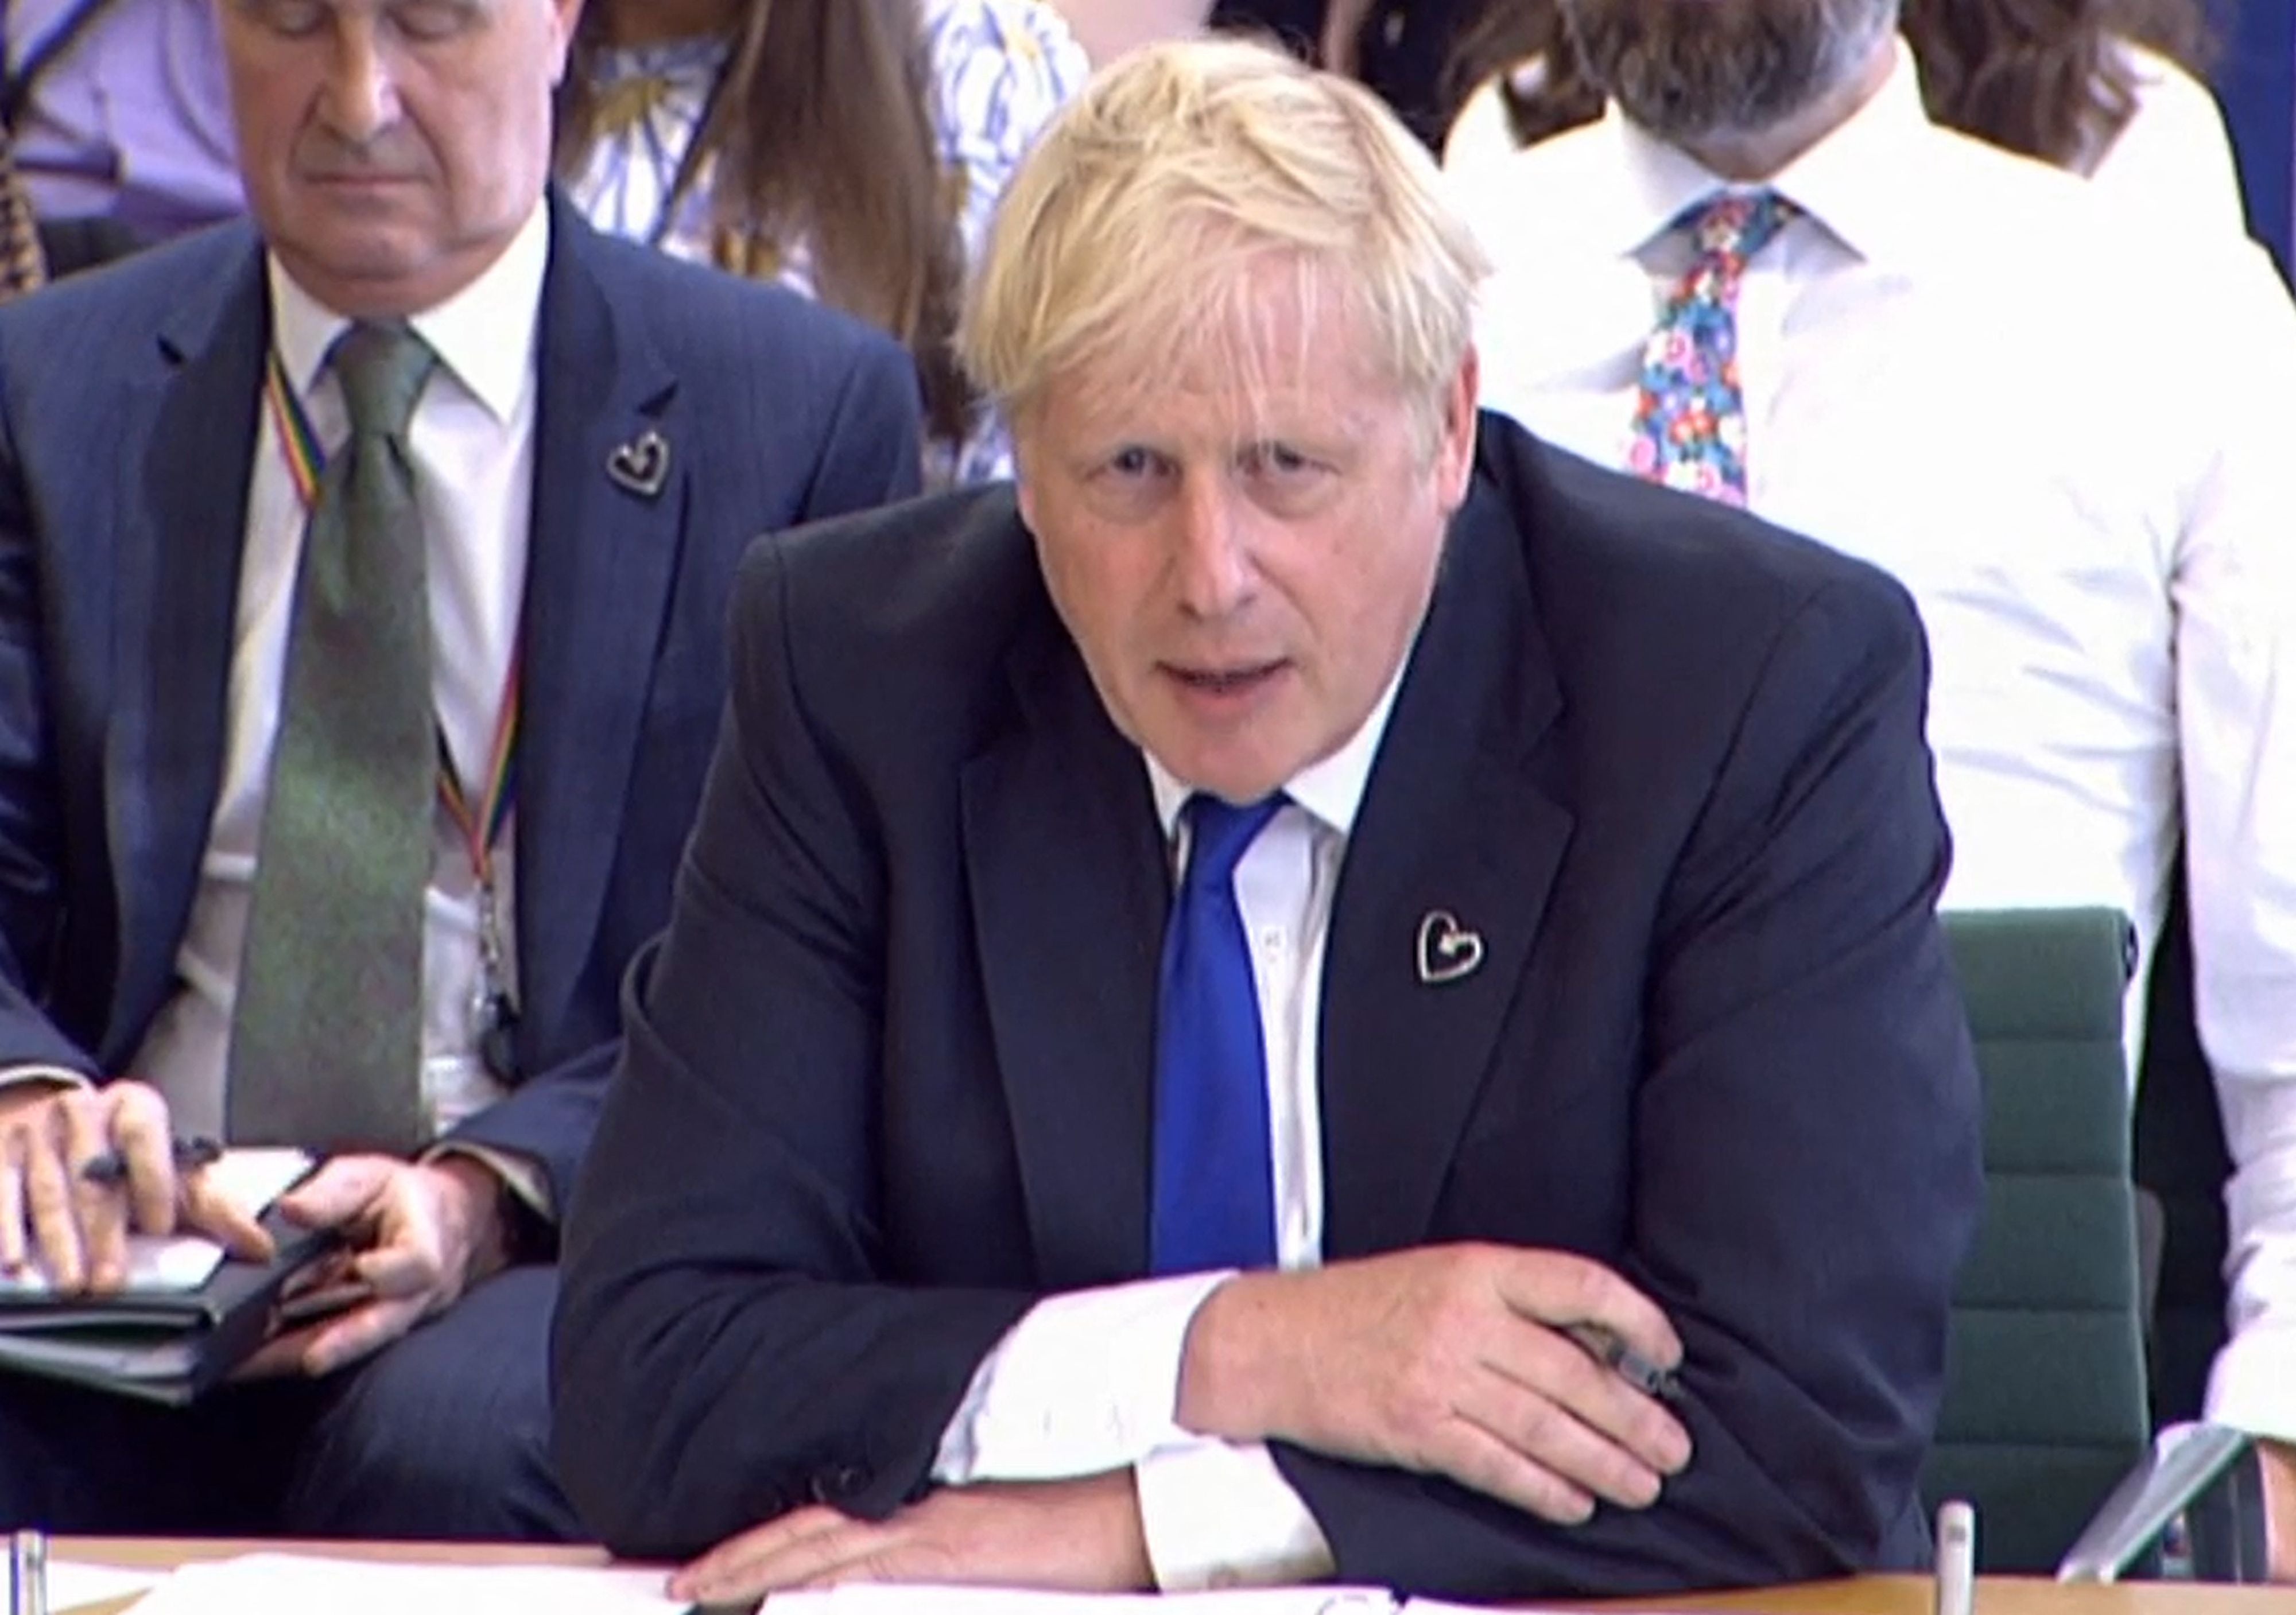 One No 10 insider said Boris Johnson is ‘in complete denial’